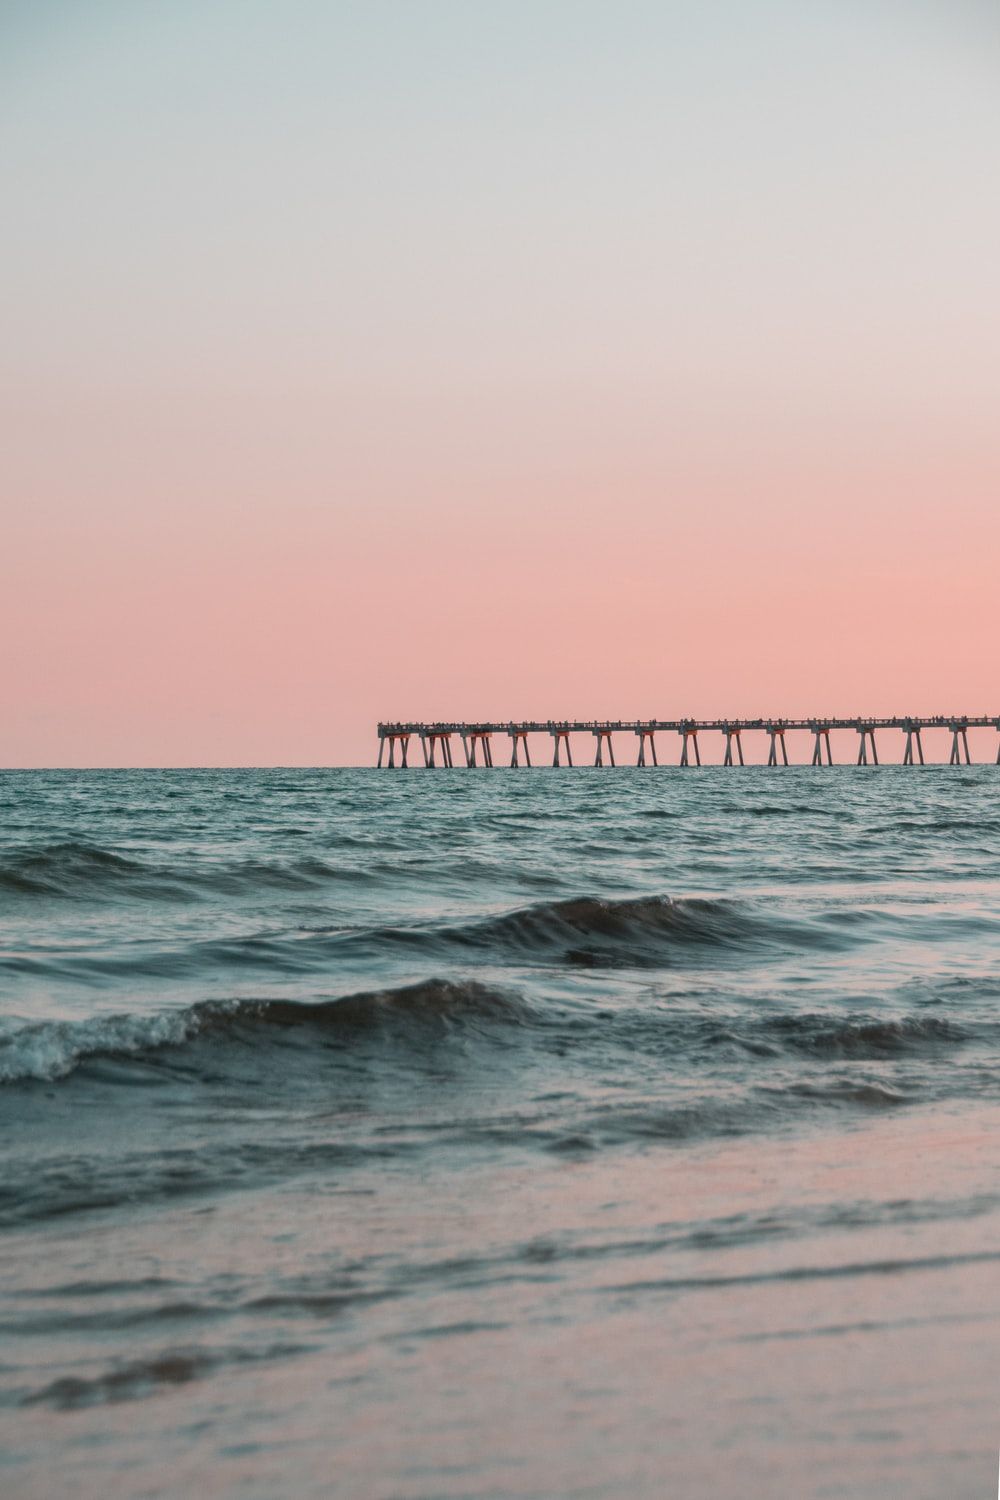 Pensacola Beach Picture. Download Free Image